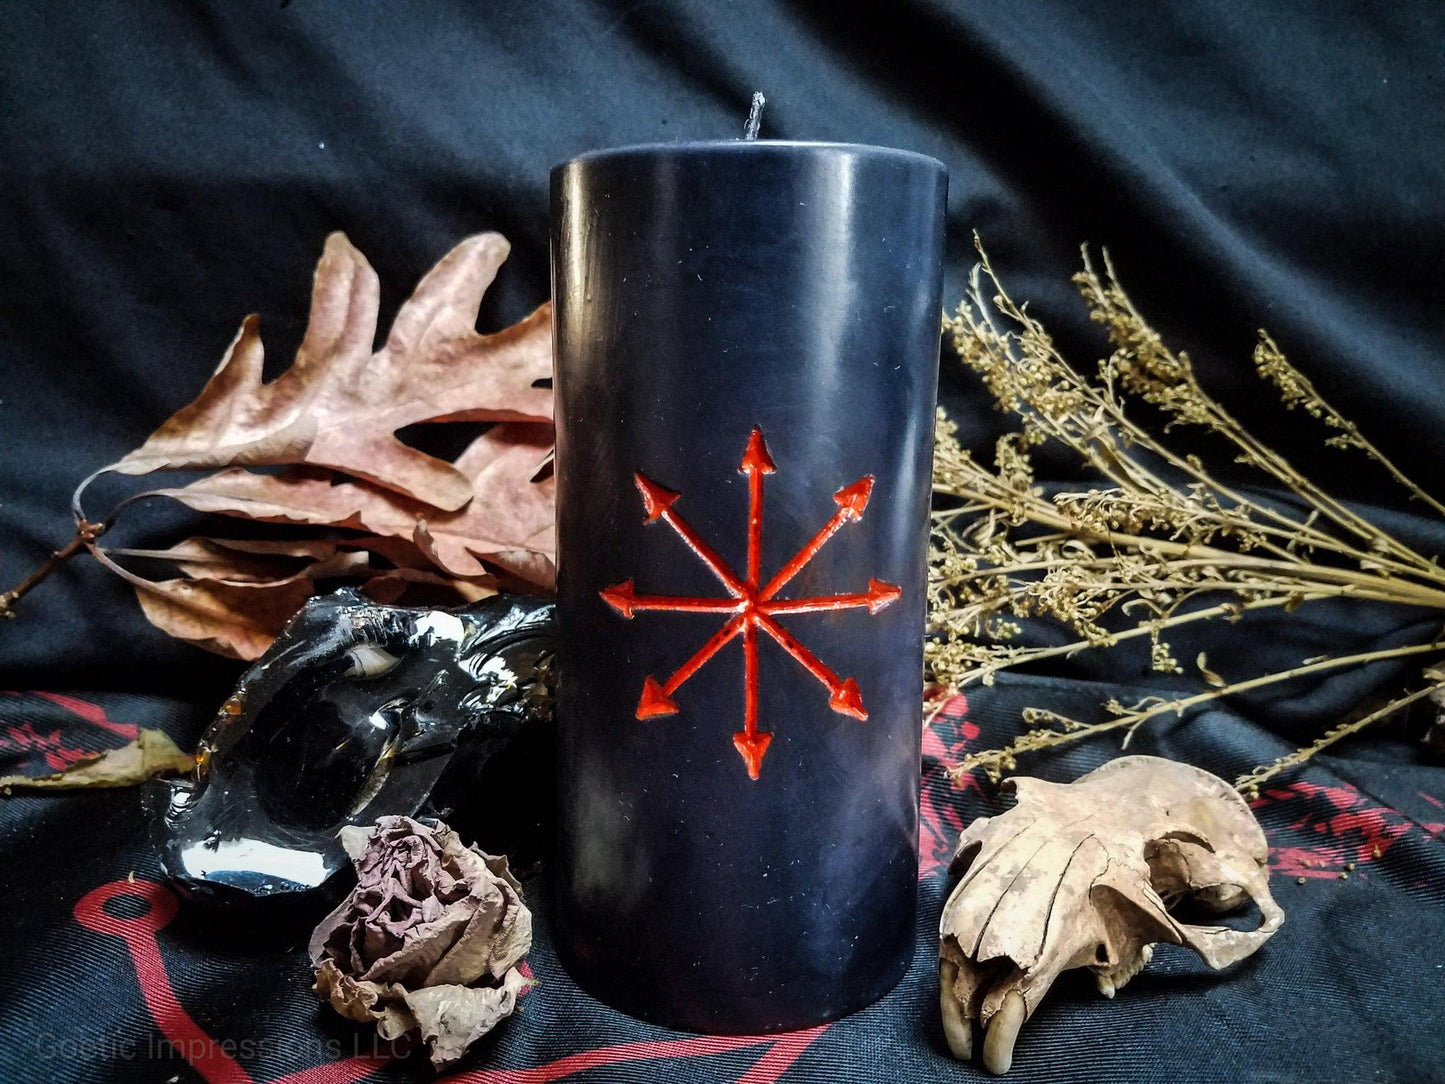 Black candle with red Chaos Star sigil carved into it.